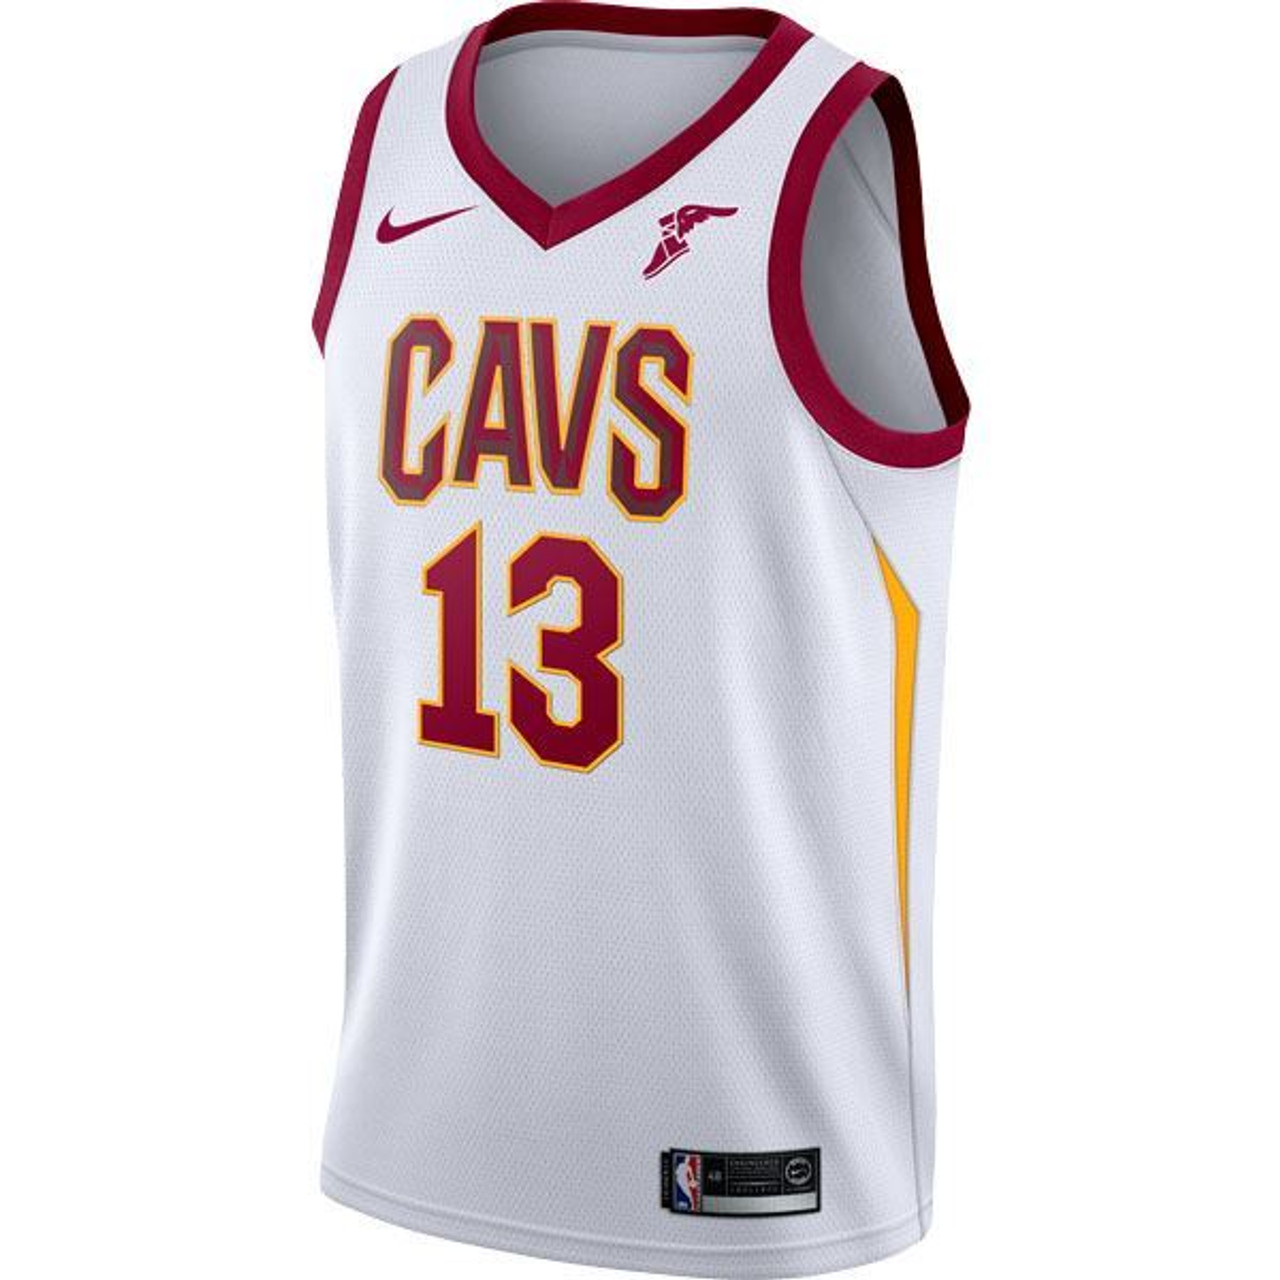 cavaliers jersey numbers